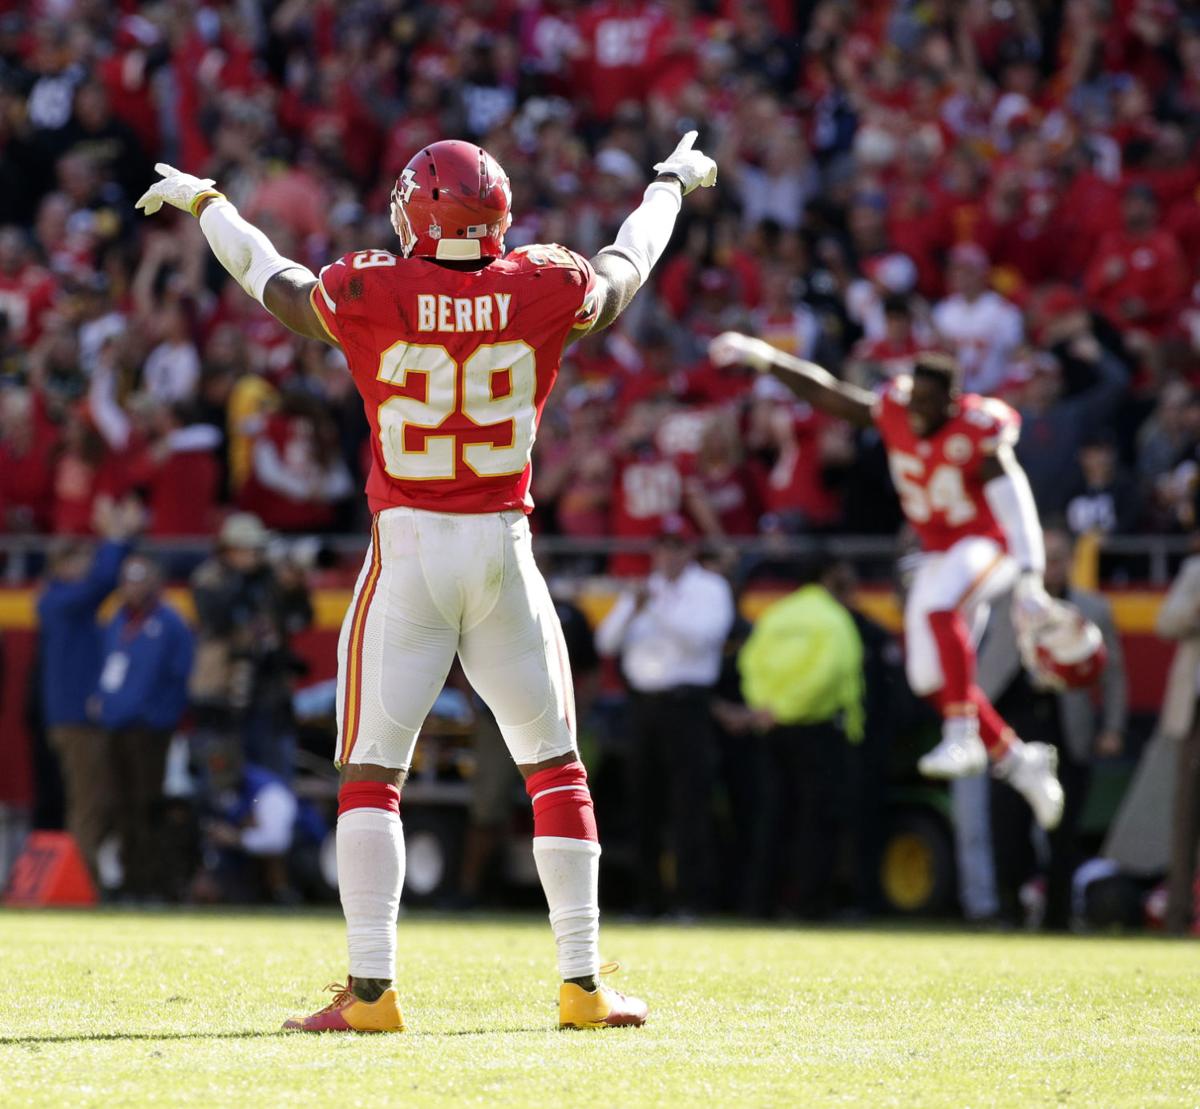 Channel 4 goes full throttle with Kansas City Chiefs again this season:  Media Views